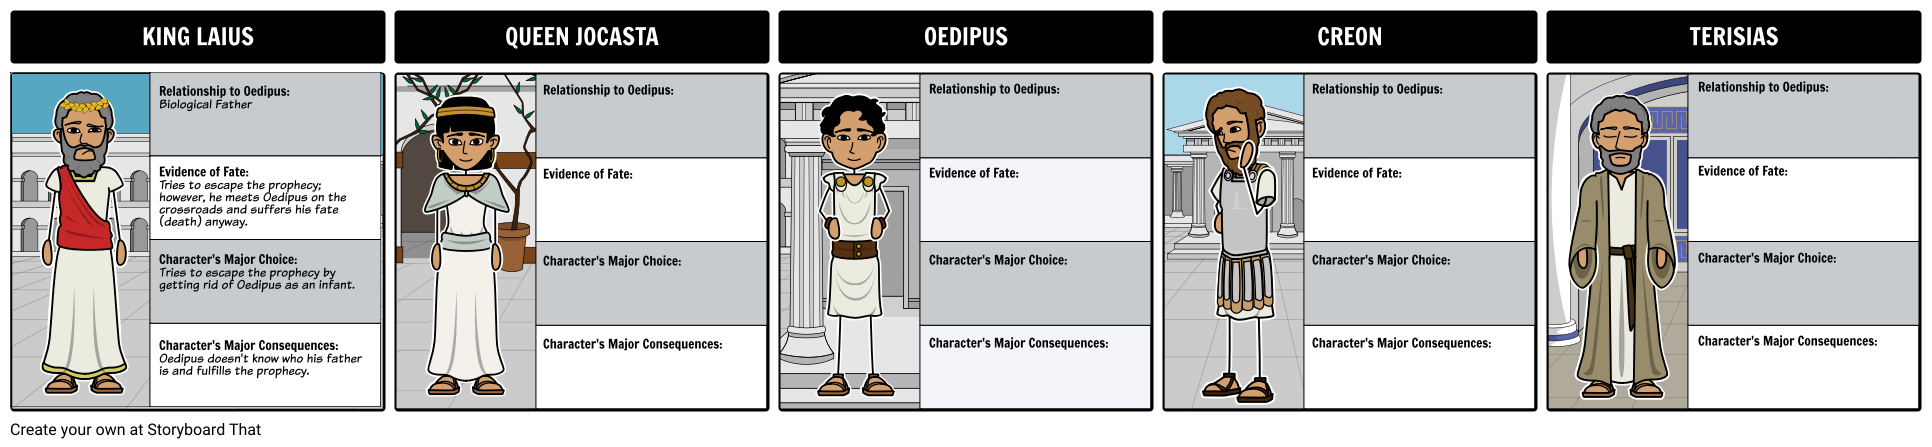 characters of oedipus rex